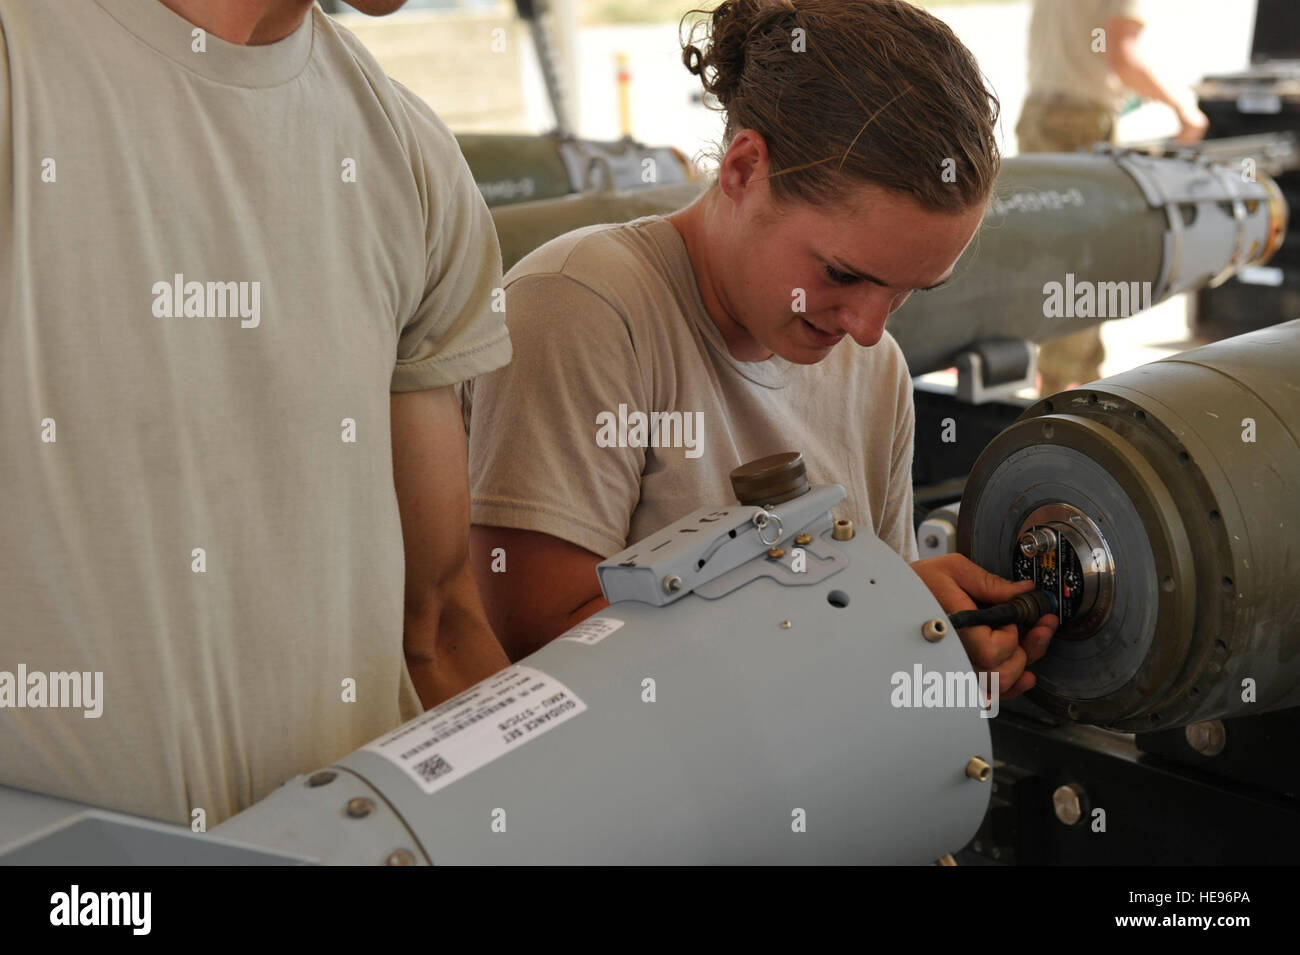 U.S. Air Force Airman 1st Class Casey Cain, a munitions systems technician currently assigned to the 455th Expeditionary Maintenance Squadron connects an FMU-152 tail fuse during a GBU-38 bomb build. GBU-38s are key weapons used on F-16C Fighting Falcons. Cain, a native of Unionville, Mo., is an Air Force reservist deployed from the 442nd Fighter Wing, Whiteman Air Force Base, Mo. She is part of a team of 10 munitions systems airmen from three U.S. bases are responsible for assembling bombs and ammunition that help keep U.S. ground forces safe throughout Afghanistan with A-10 and F-16 Close Ai Stock Photo